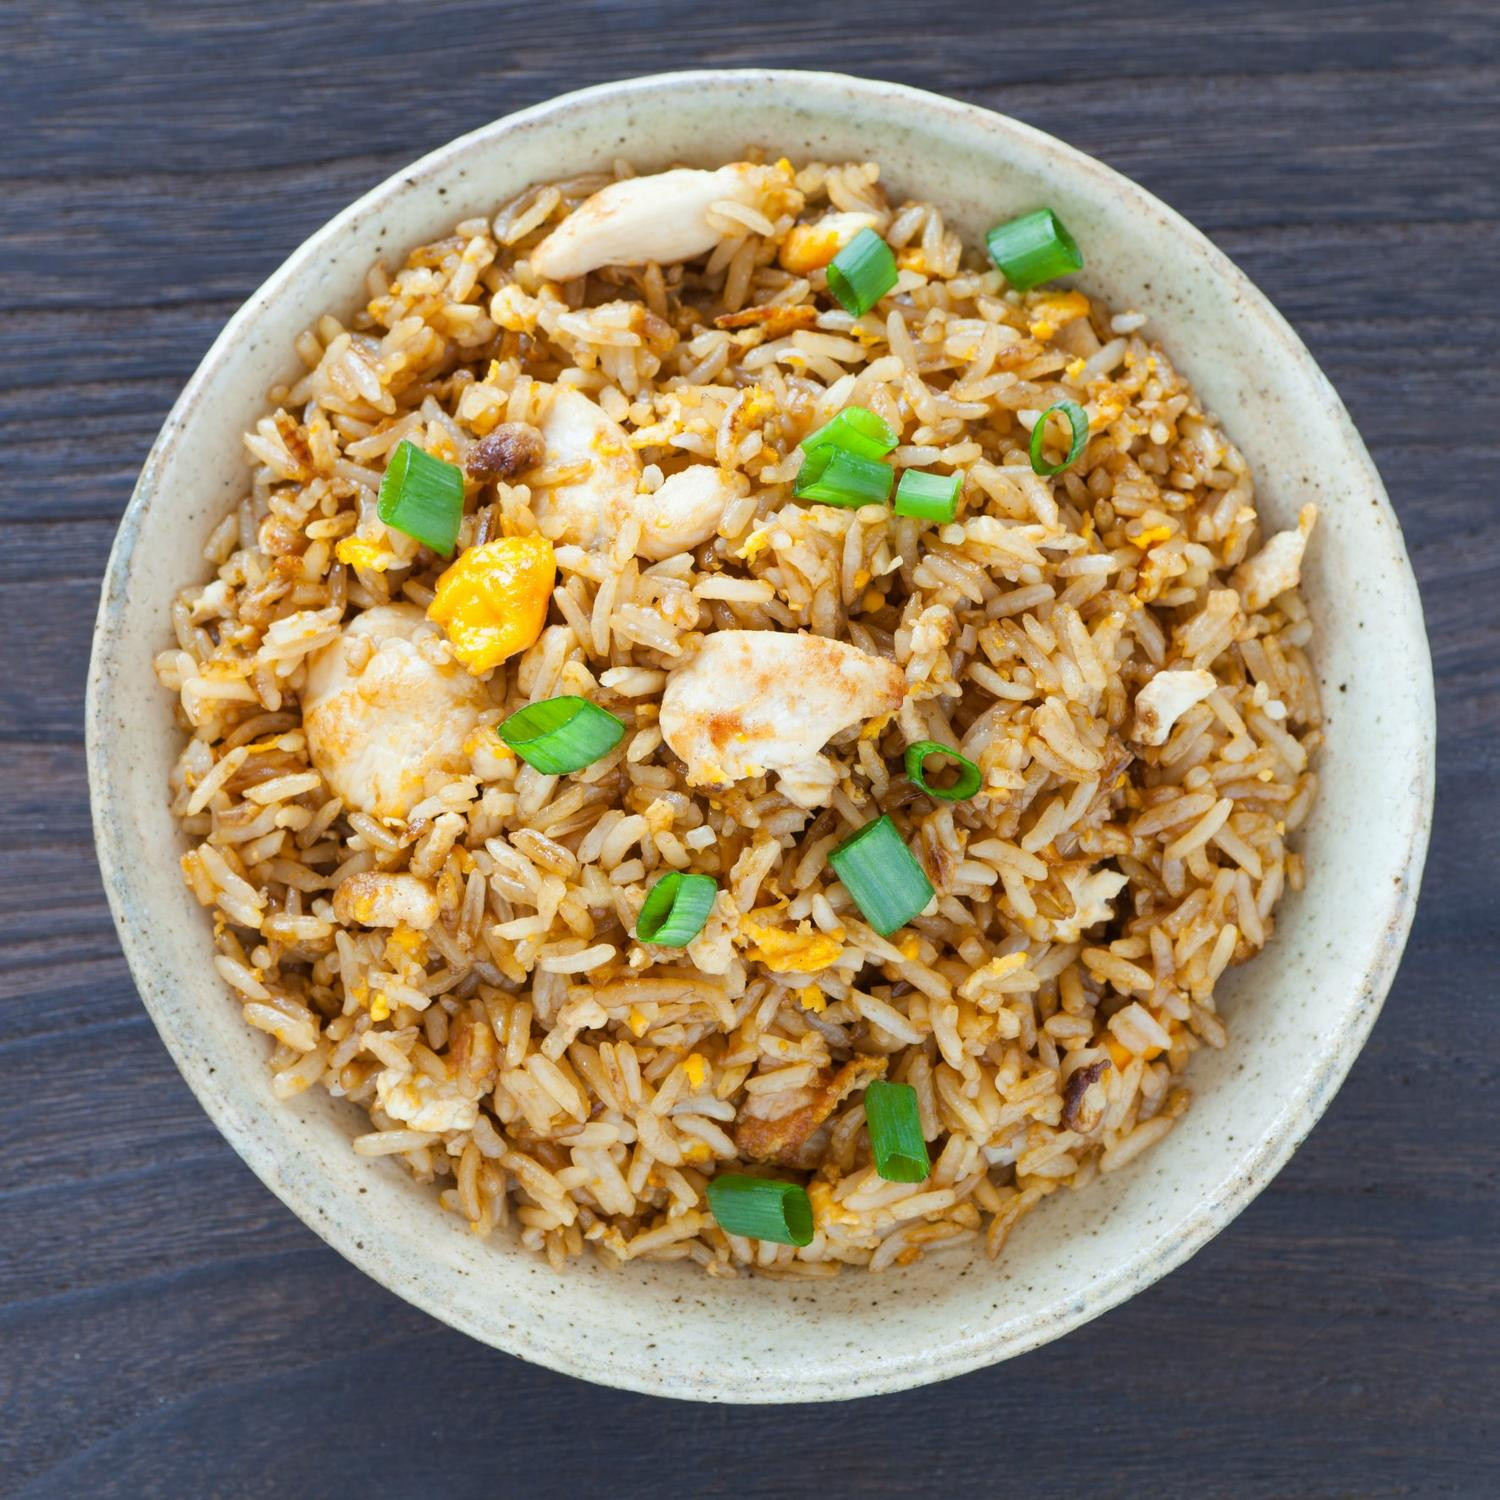 Healthy Fried Rice Recipes
 A Healthy Fried Rice Recipe That Every Fit Girl Needs